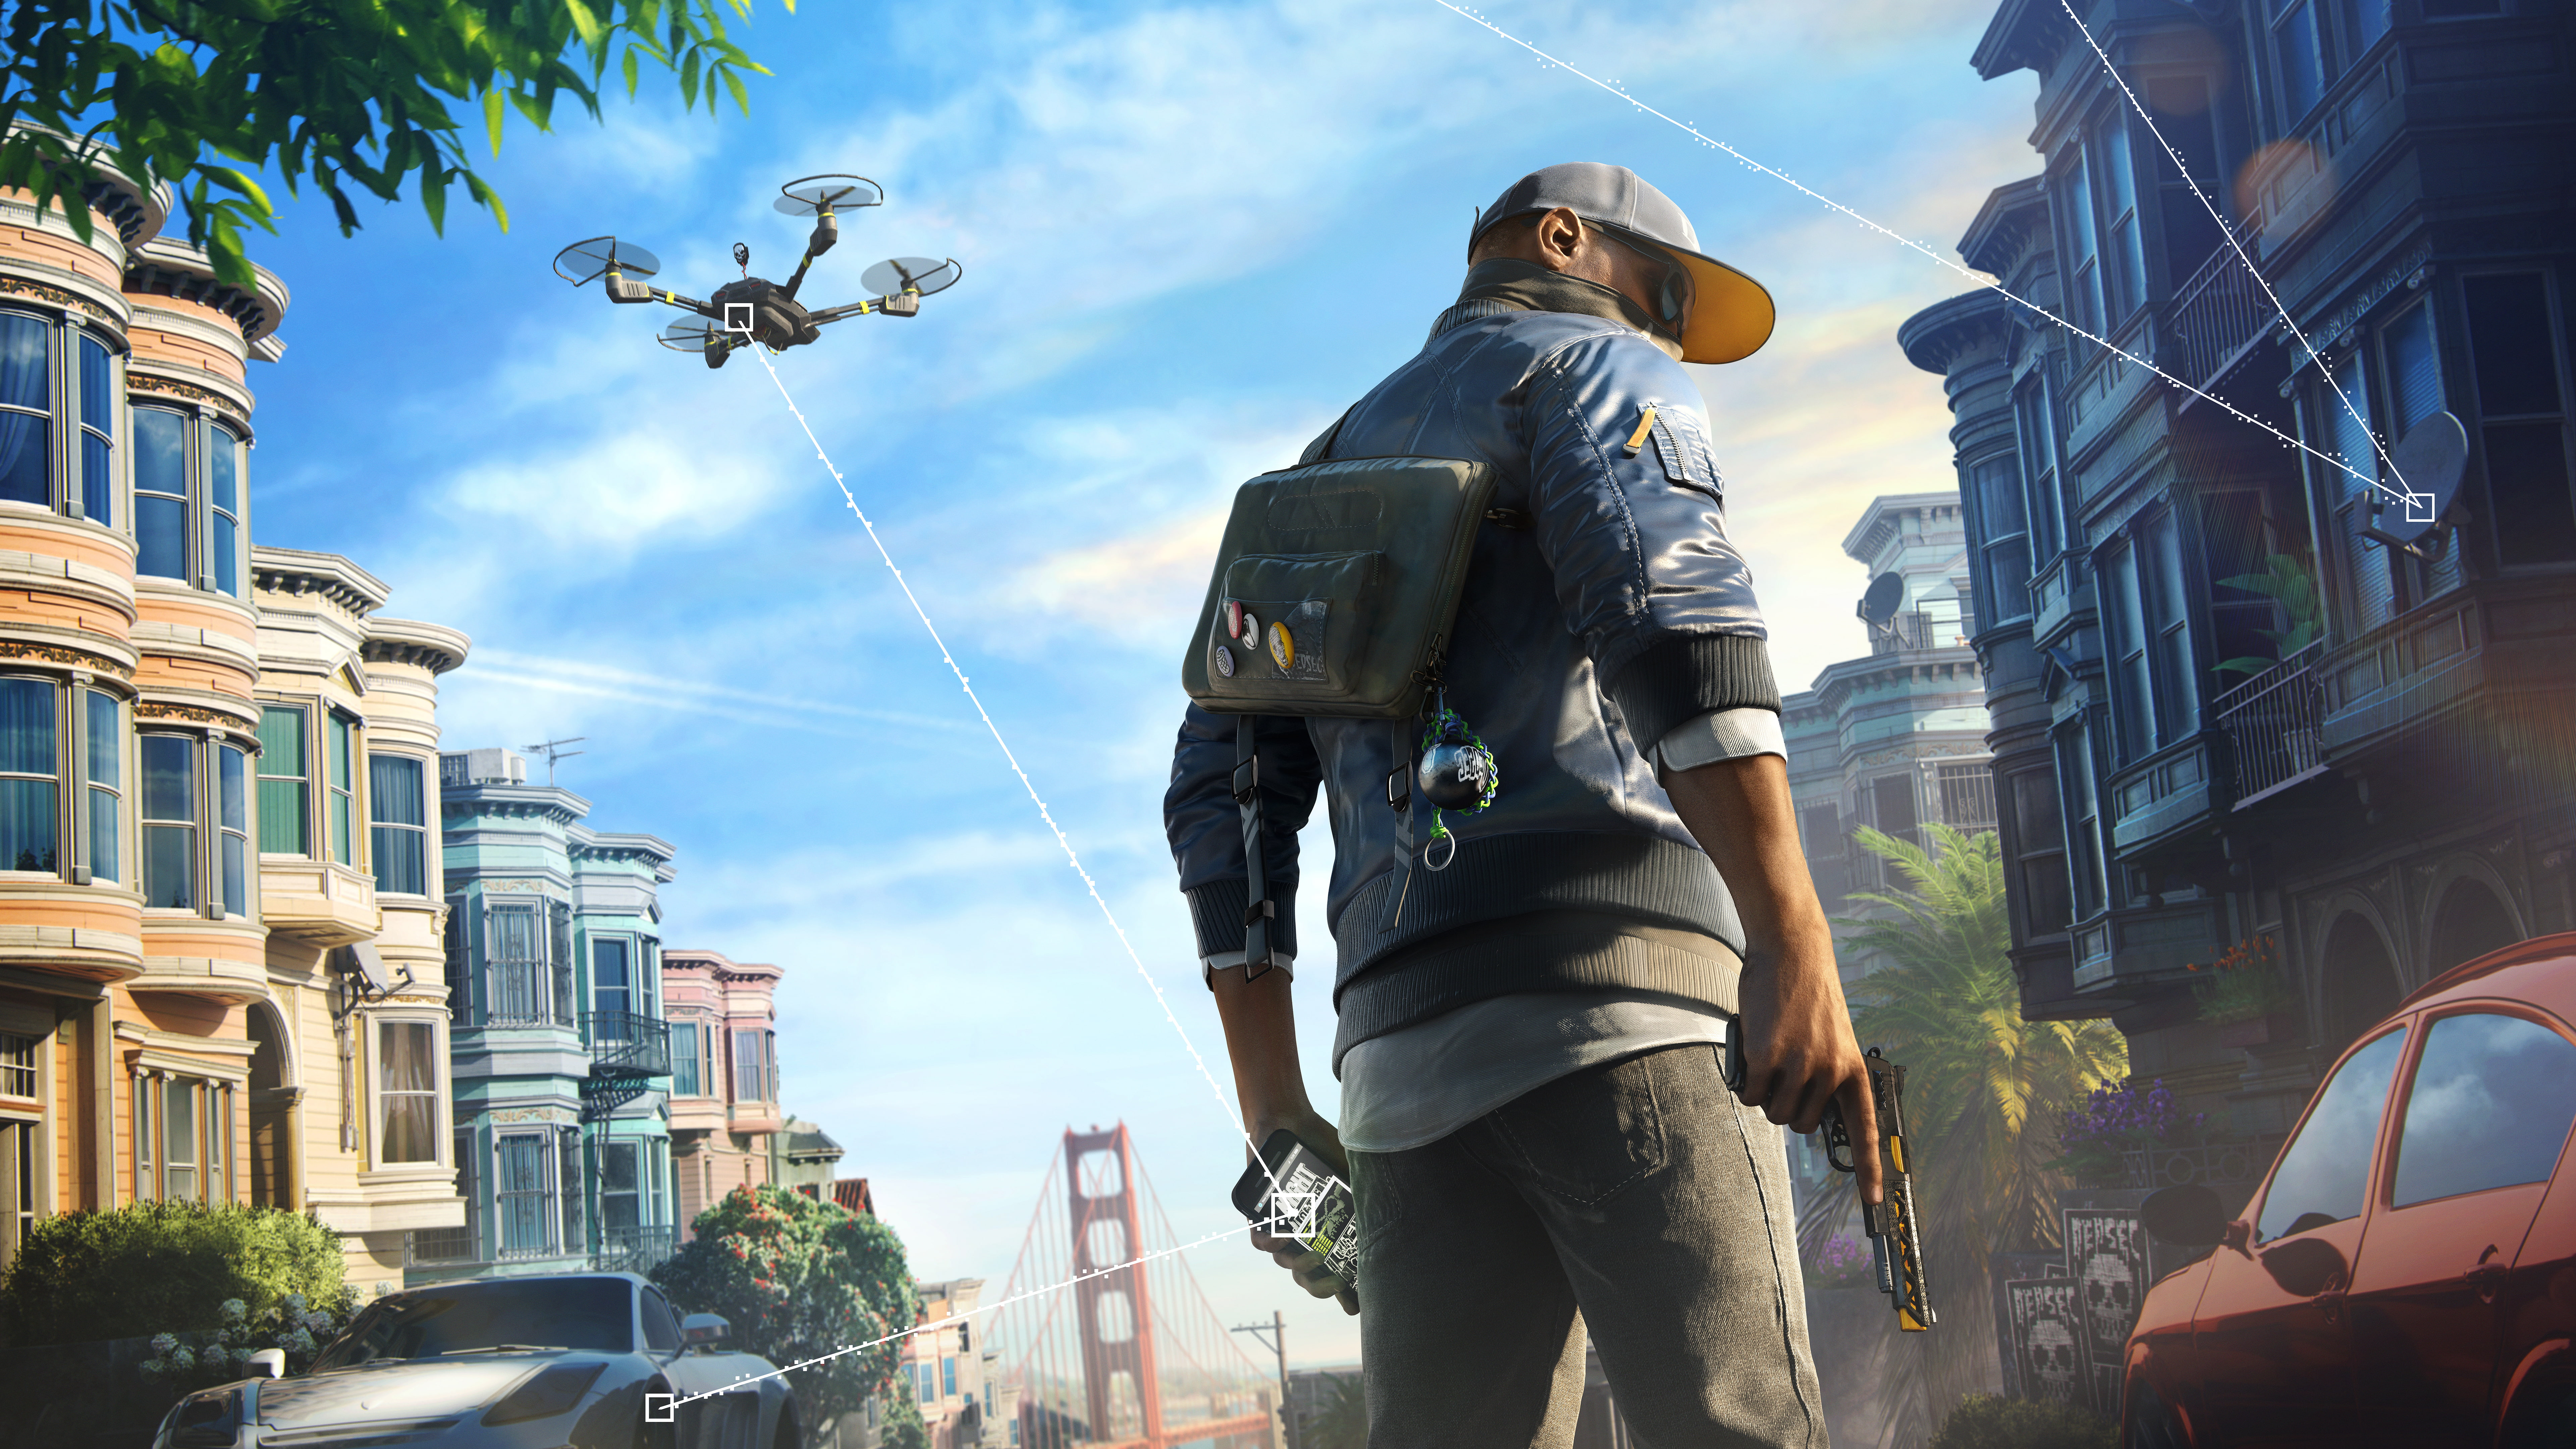 2016 Games, 4K, Marcus, 8K, Watch Dogs 2